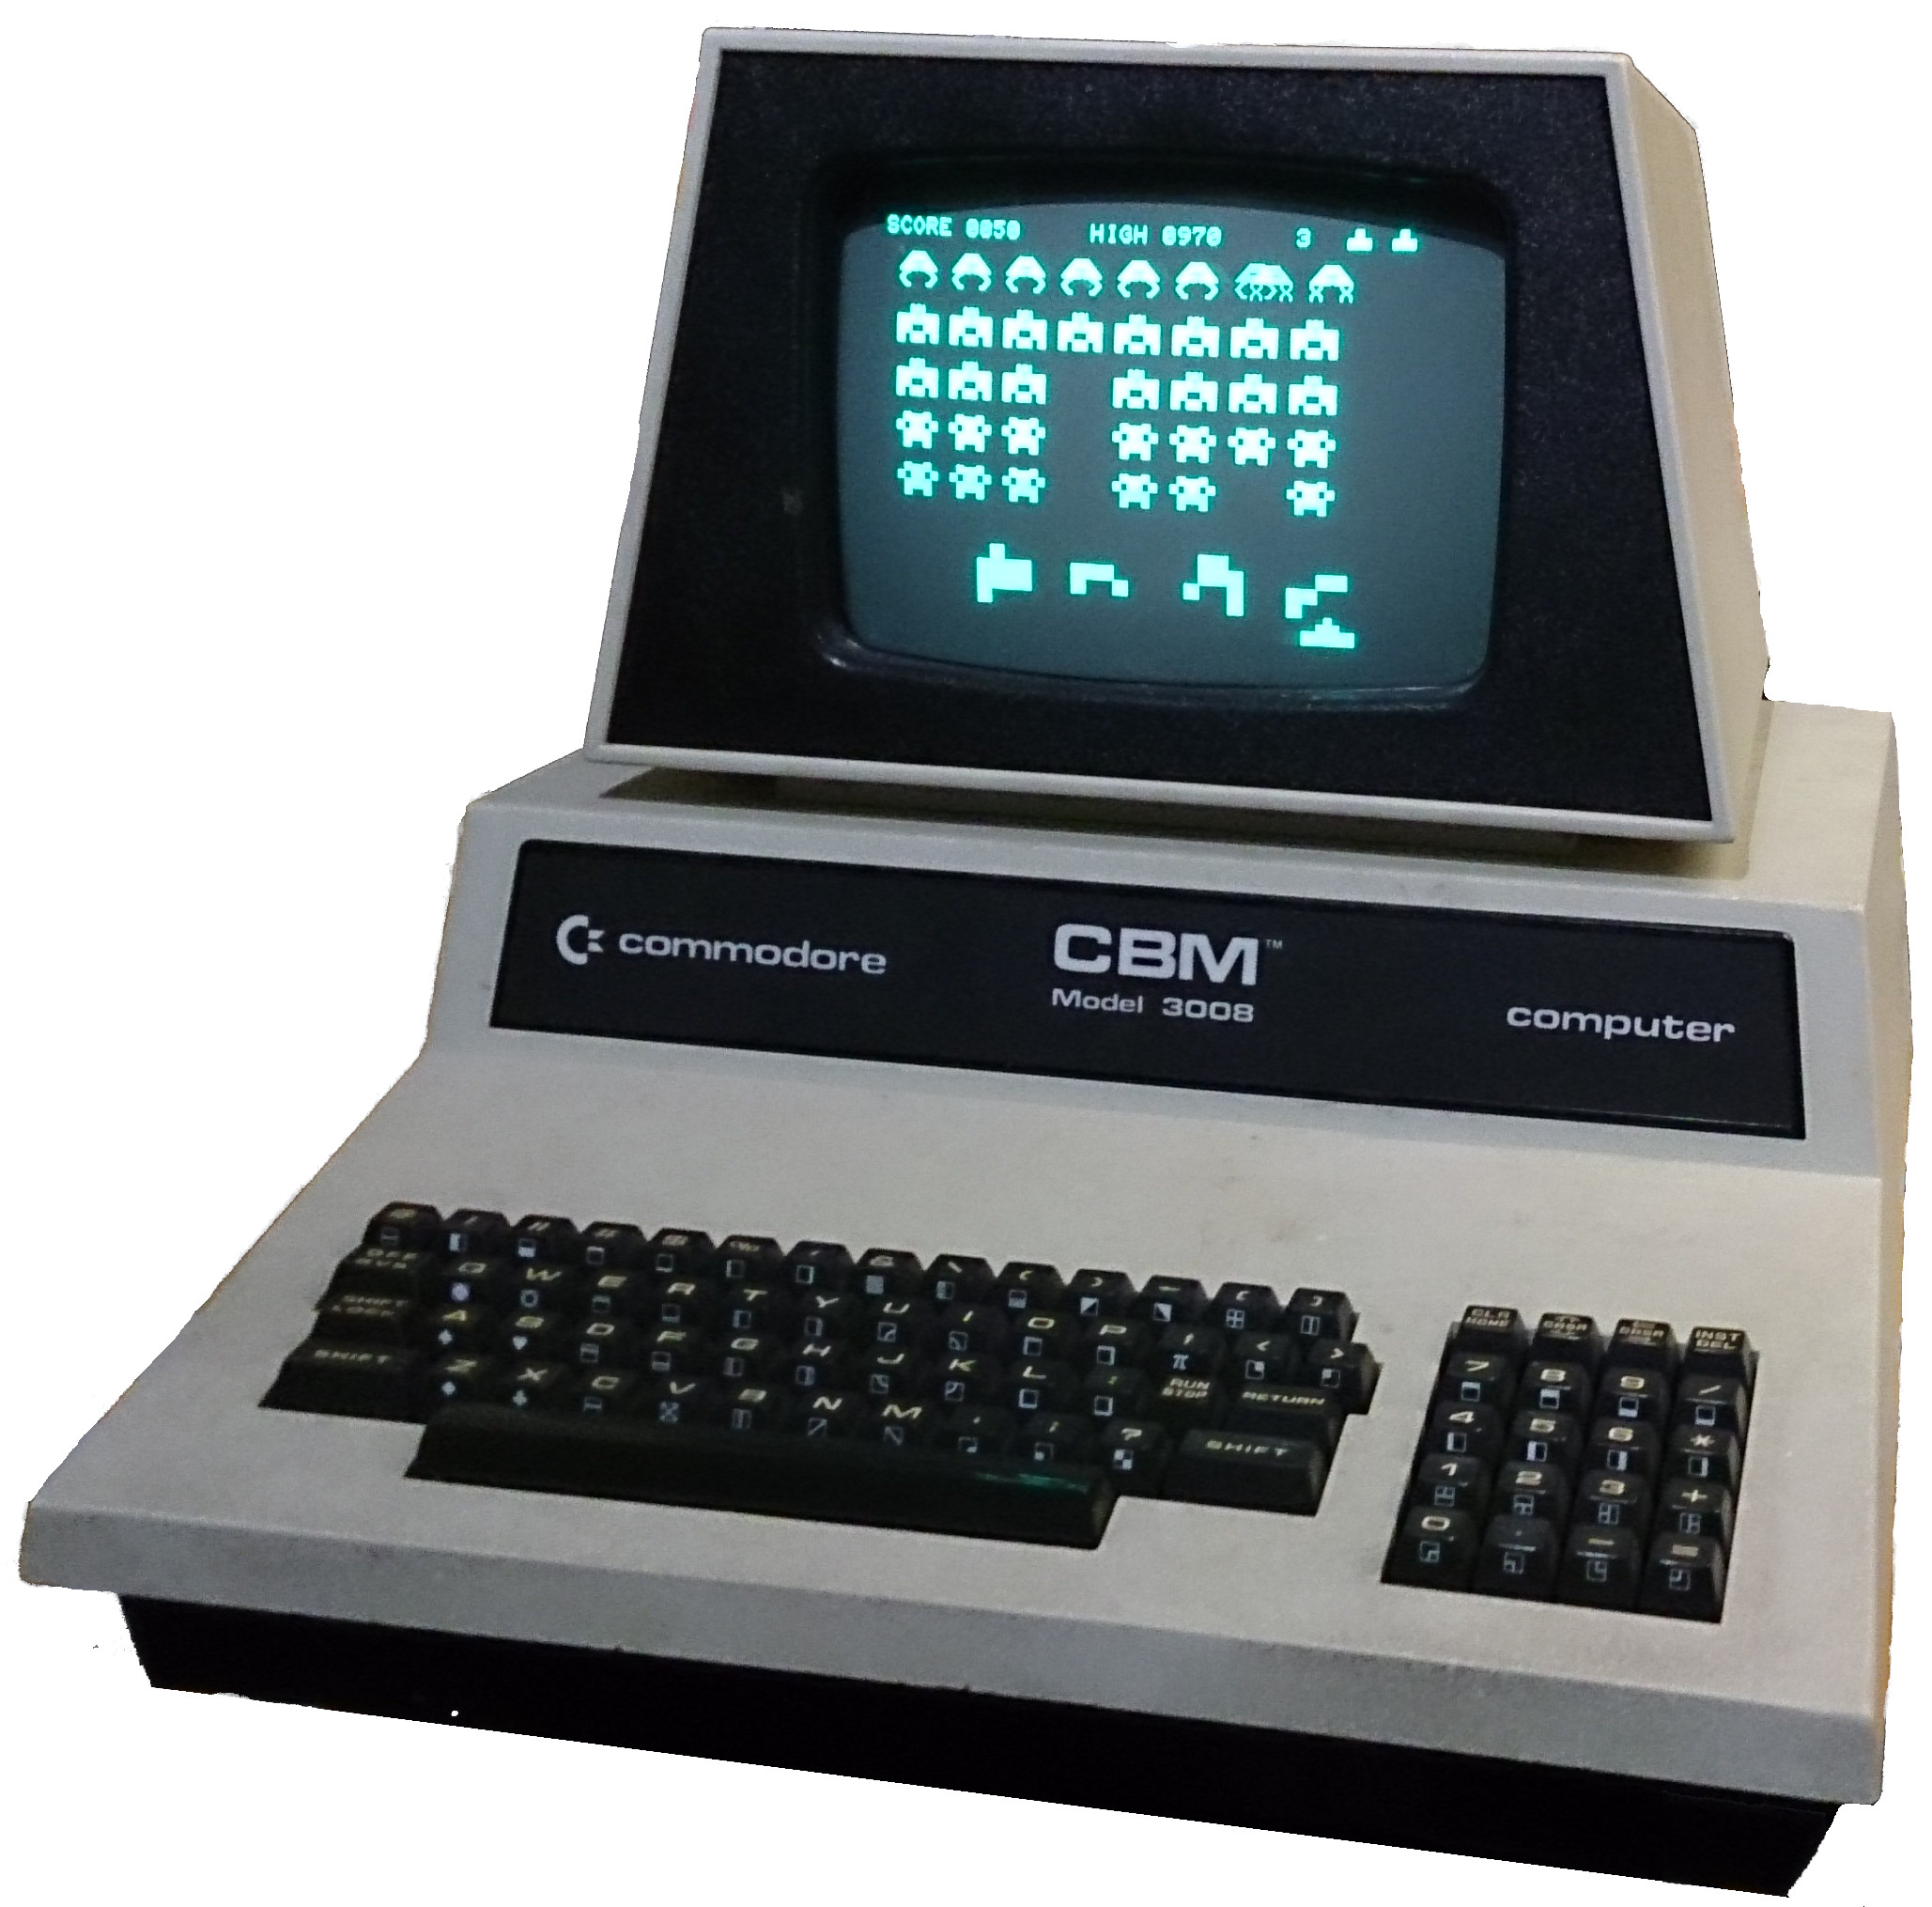 A CBM Pet computer showing an Invaders game that inspired the making of Invaders in Java for Android